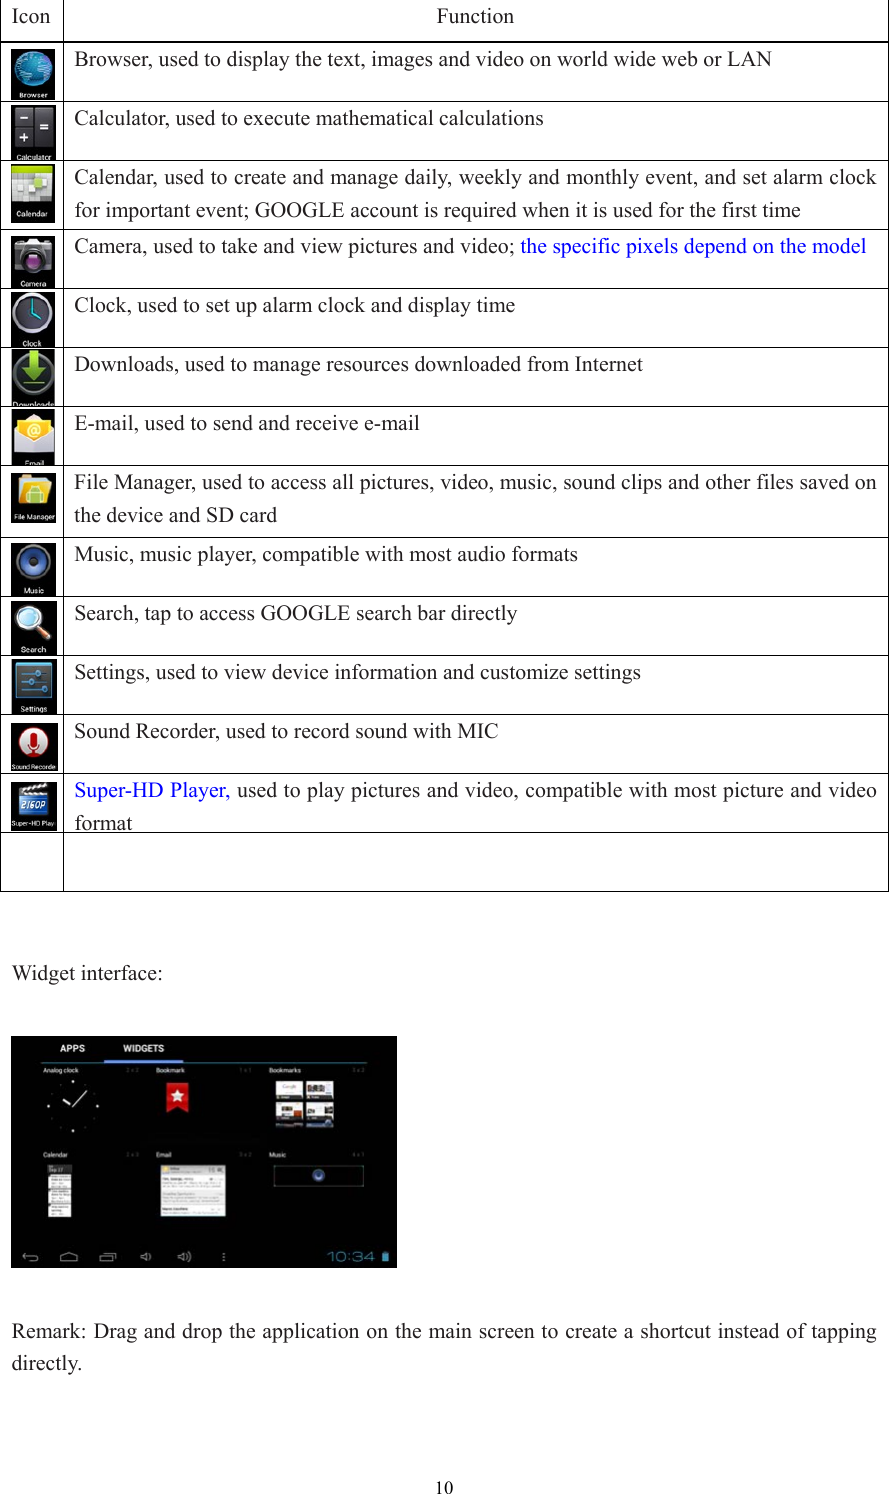  10Icon Function  Browser, used to display the text, images and video on world wide web or LAN Calculator, used to execute mathematical calculations  Calendar, used to create and manage daily, weekly and monthly event, and set alarm clock for important event; GOOGLE account is required when it is used for the first time  Camera, used to take and view pictures and video; the specific pixels depend on the model Clock, used to set up alarm clock and display time Downloads, used to manage resources downloaded from Internet E-mail, used to send and receive e-mail  File Manager, used to access all pictures, video, music, sound clips and other files saved on the device and SD card Music, music player, compatible with most audio formats Search, tap to access GOOGLE search bar directly Settings, used to view device information and customize settings  Sound Recorder, used to record sound with MIC  Super-HD Player, used to play pictures and video, compatible with most picture and video format     Widget interface:      Remark: Drag and drop the application on the main screen to create a shortcut instead of tapping directly. 